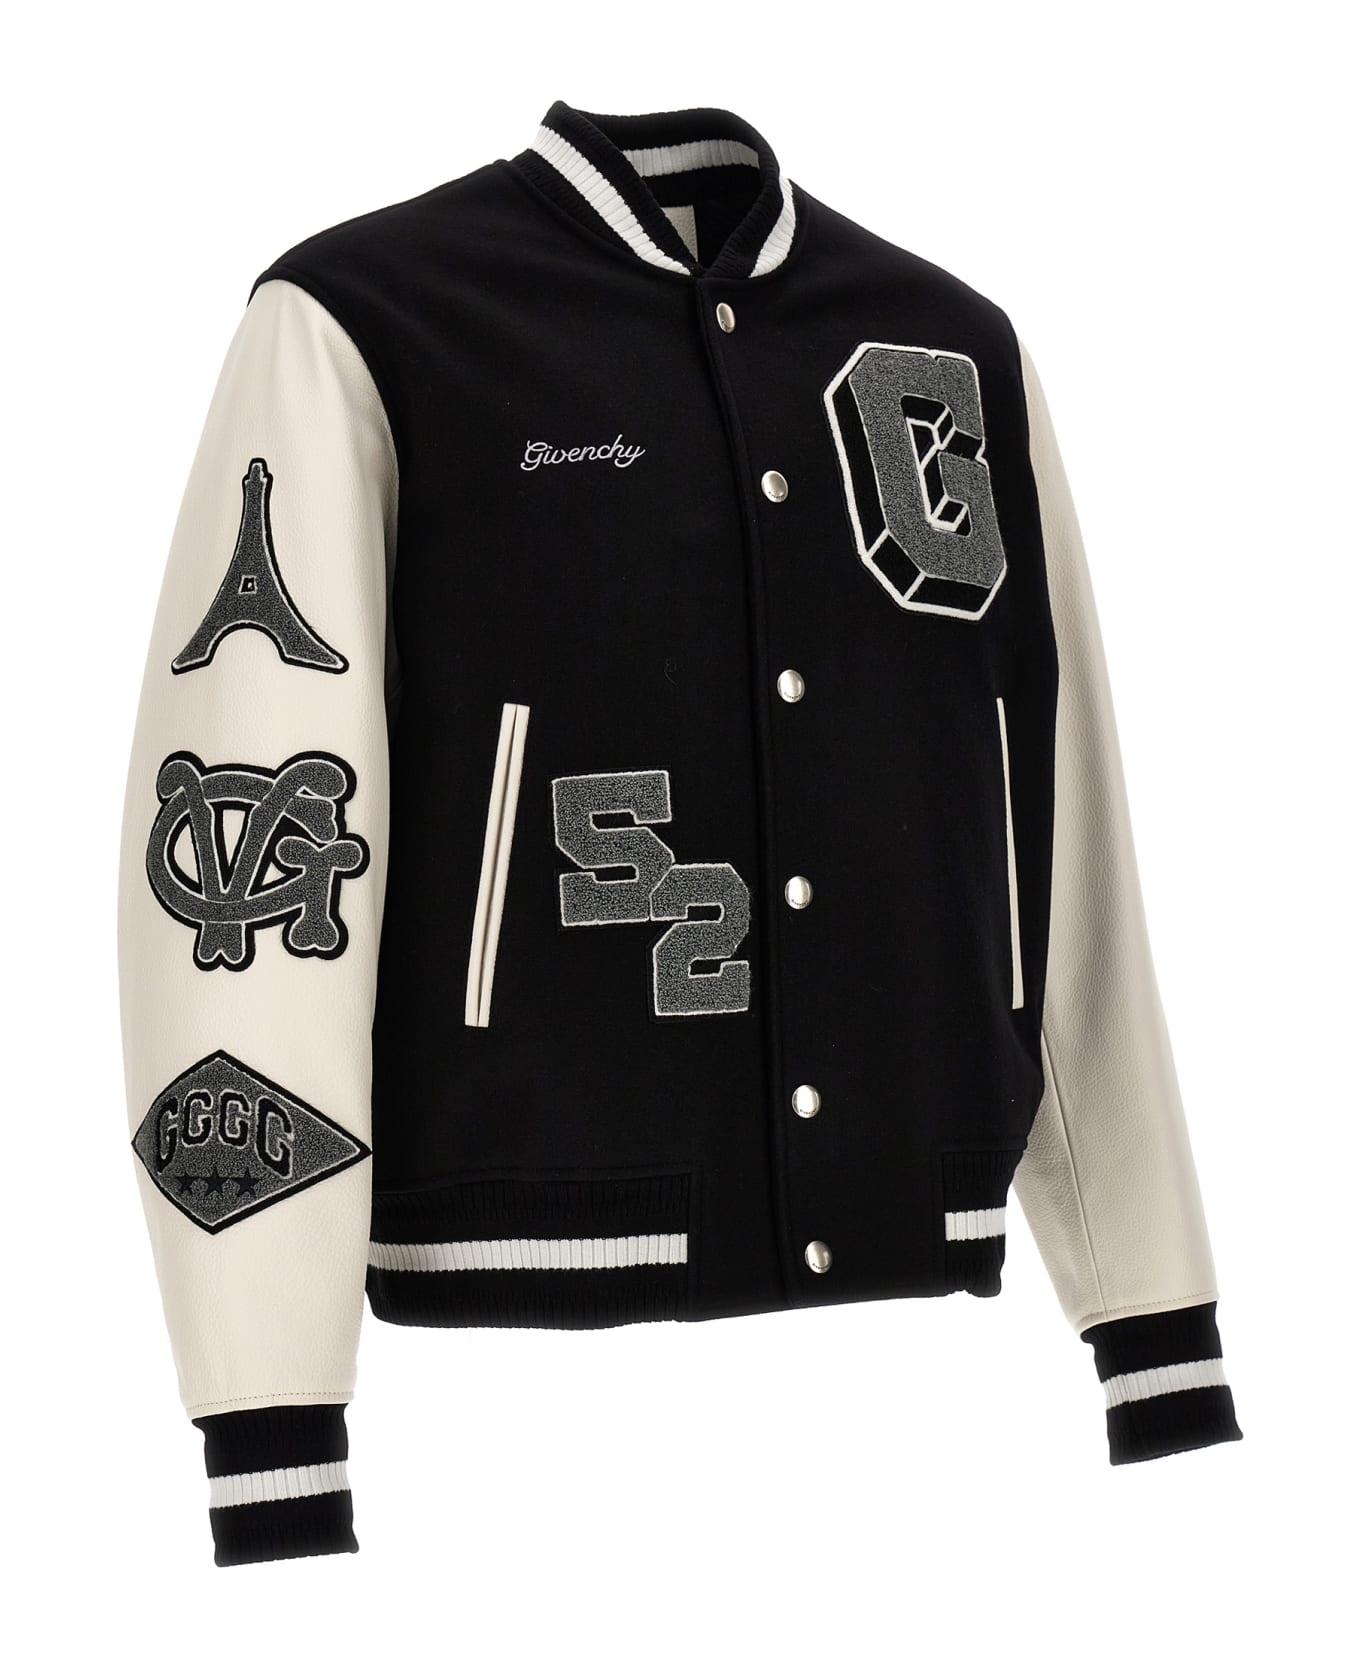 Givenchy Patches And Embroidery Bomber Jacket - White/Black